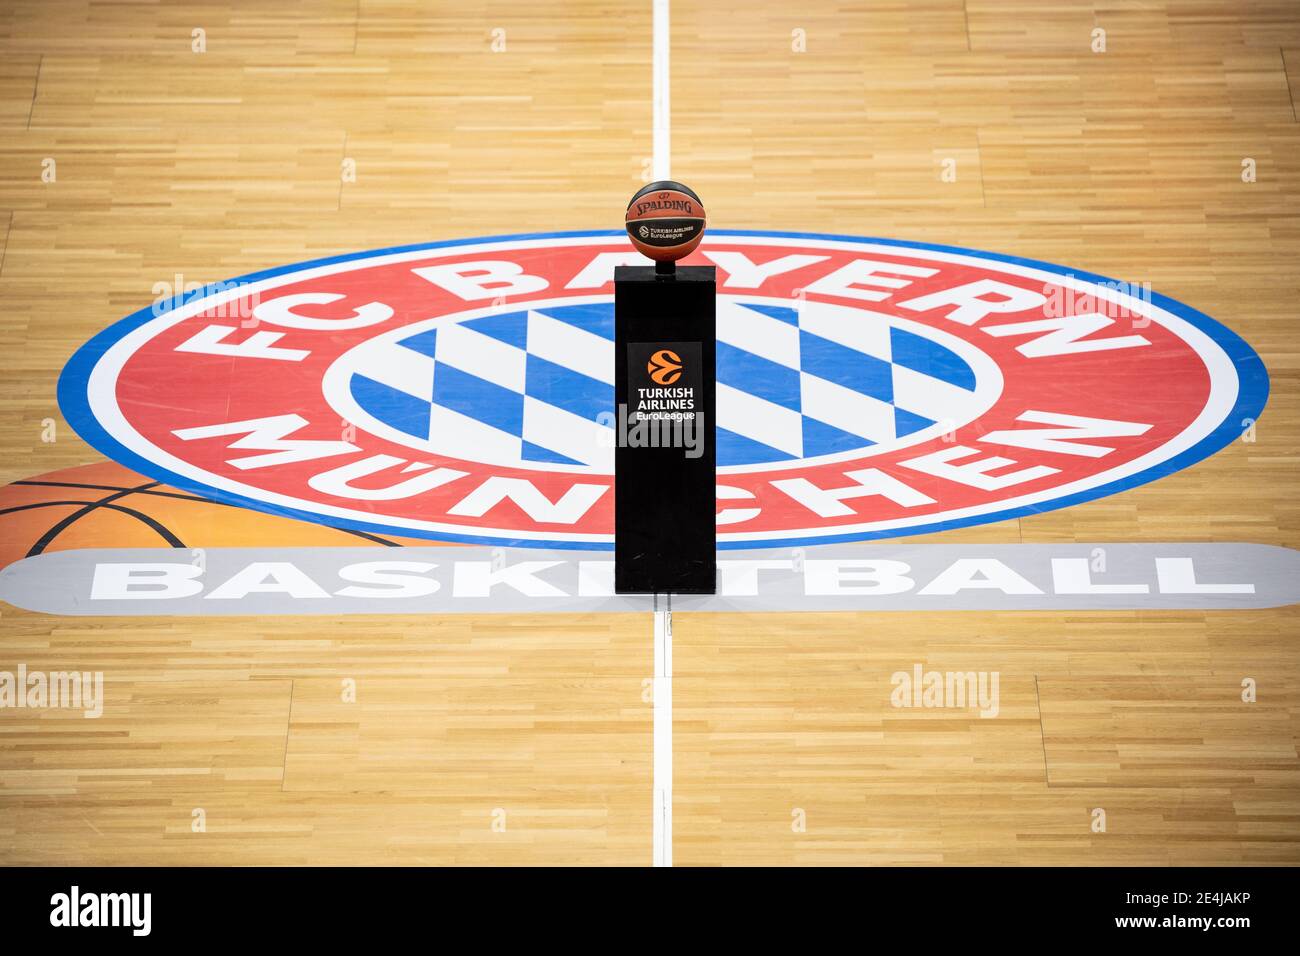 Munich, Germany. 15th Jan, 2021. Basketball: Euroleague, FC Bayern Munich -  Real Madrid at the Audi Dome. The match ball can be seen on a podium in  front of the FC Bayern